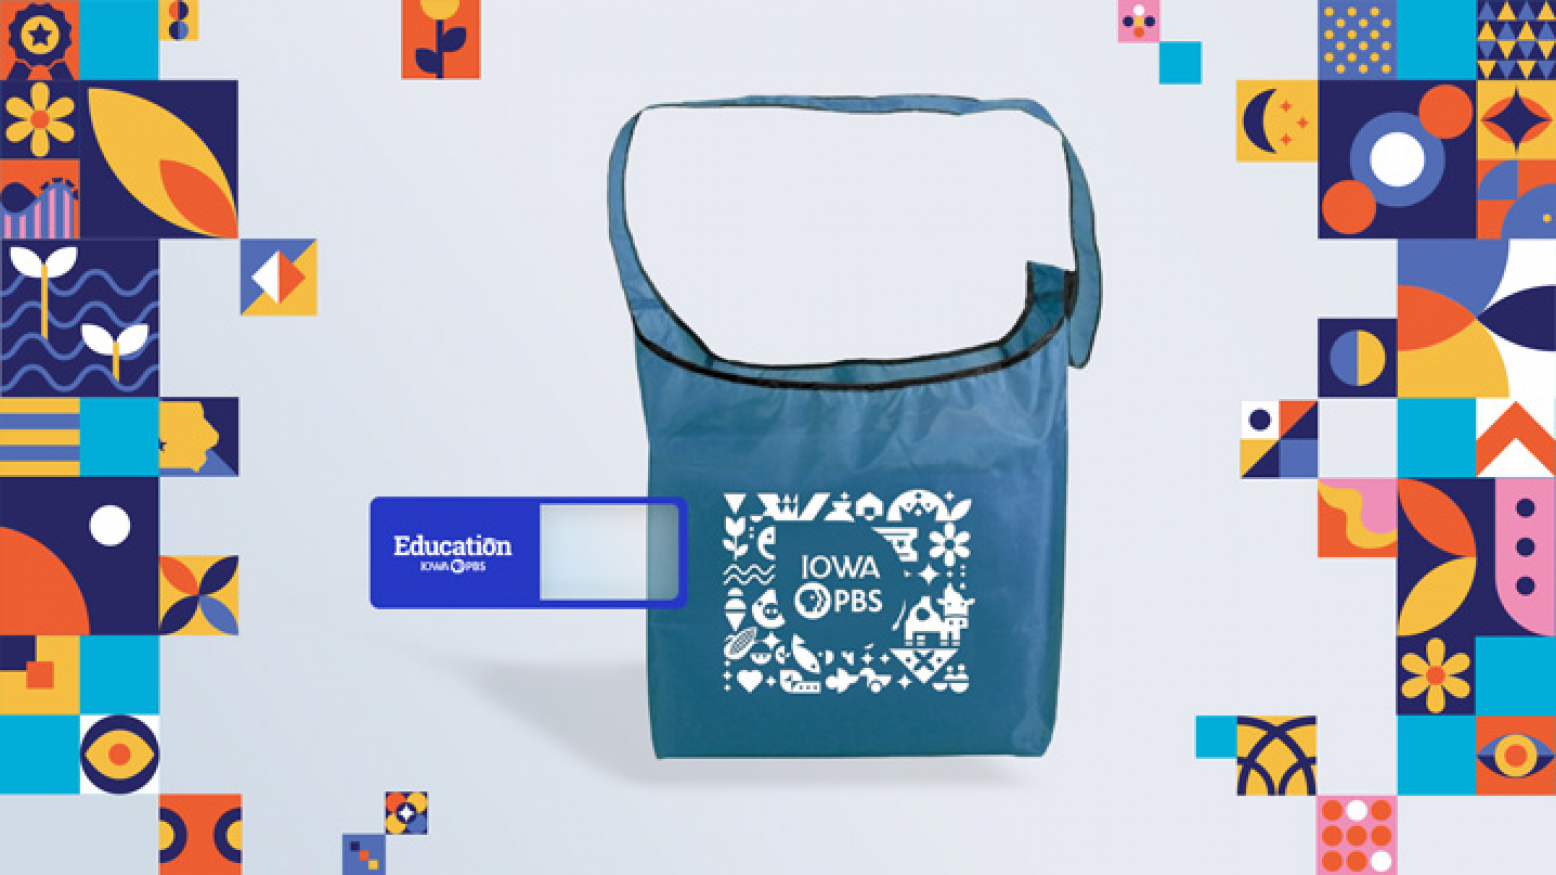 Blue bag with logo and other brightly colored square images